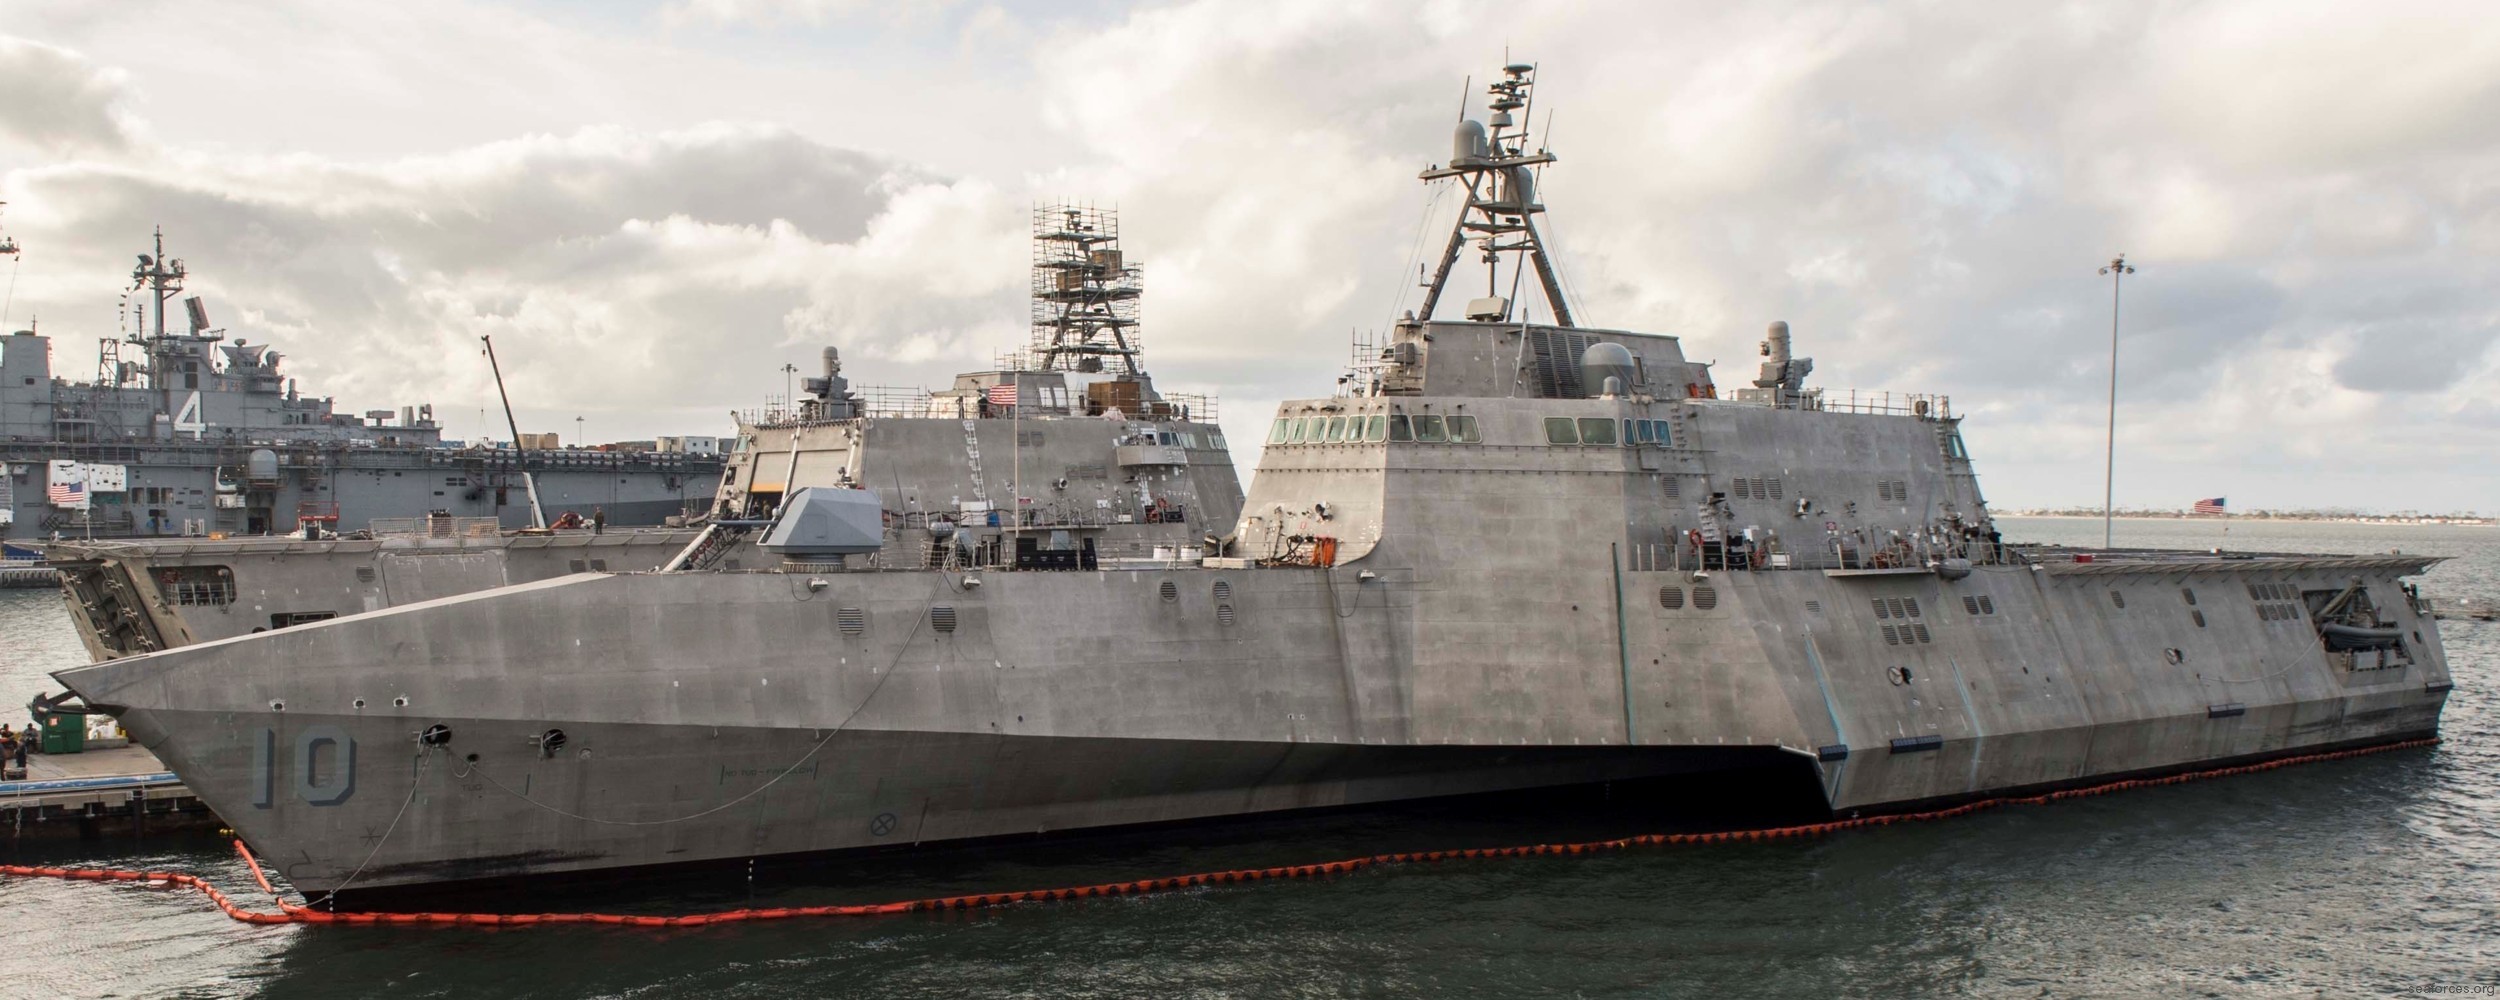 lcs-10 uss gabrielle giffords littoral combat ship independence class us navy 10